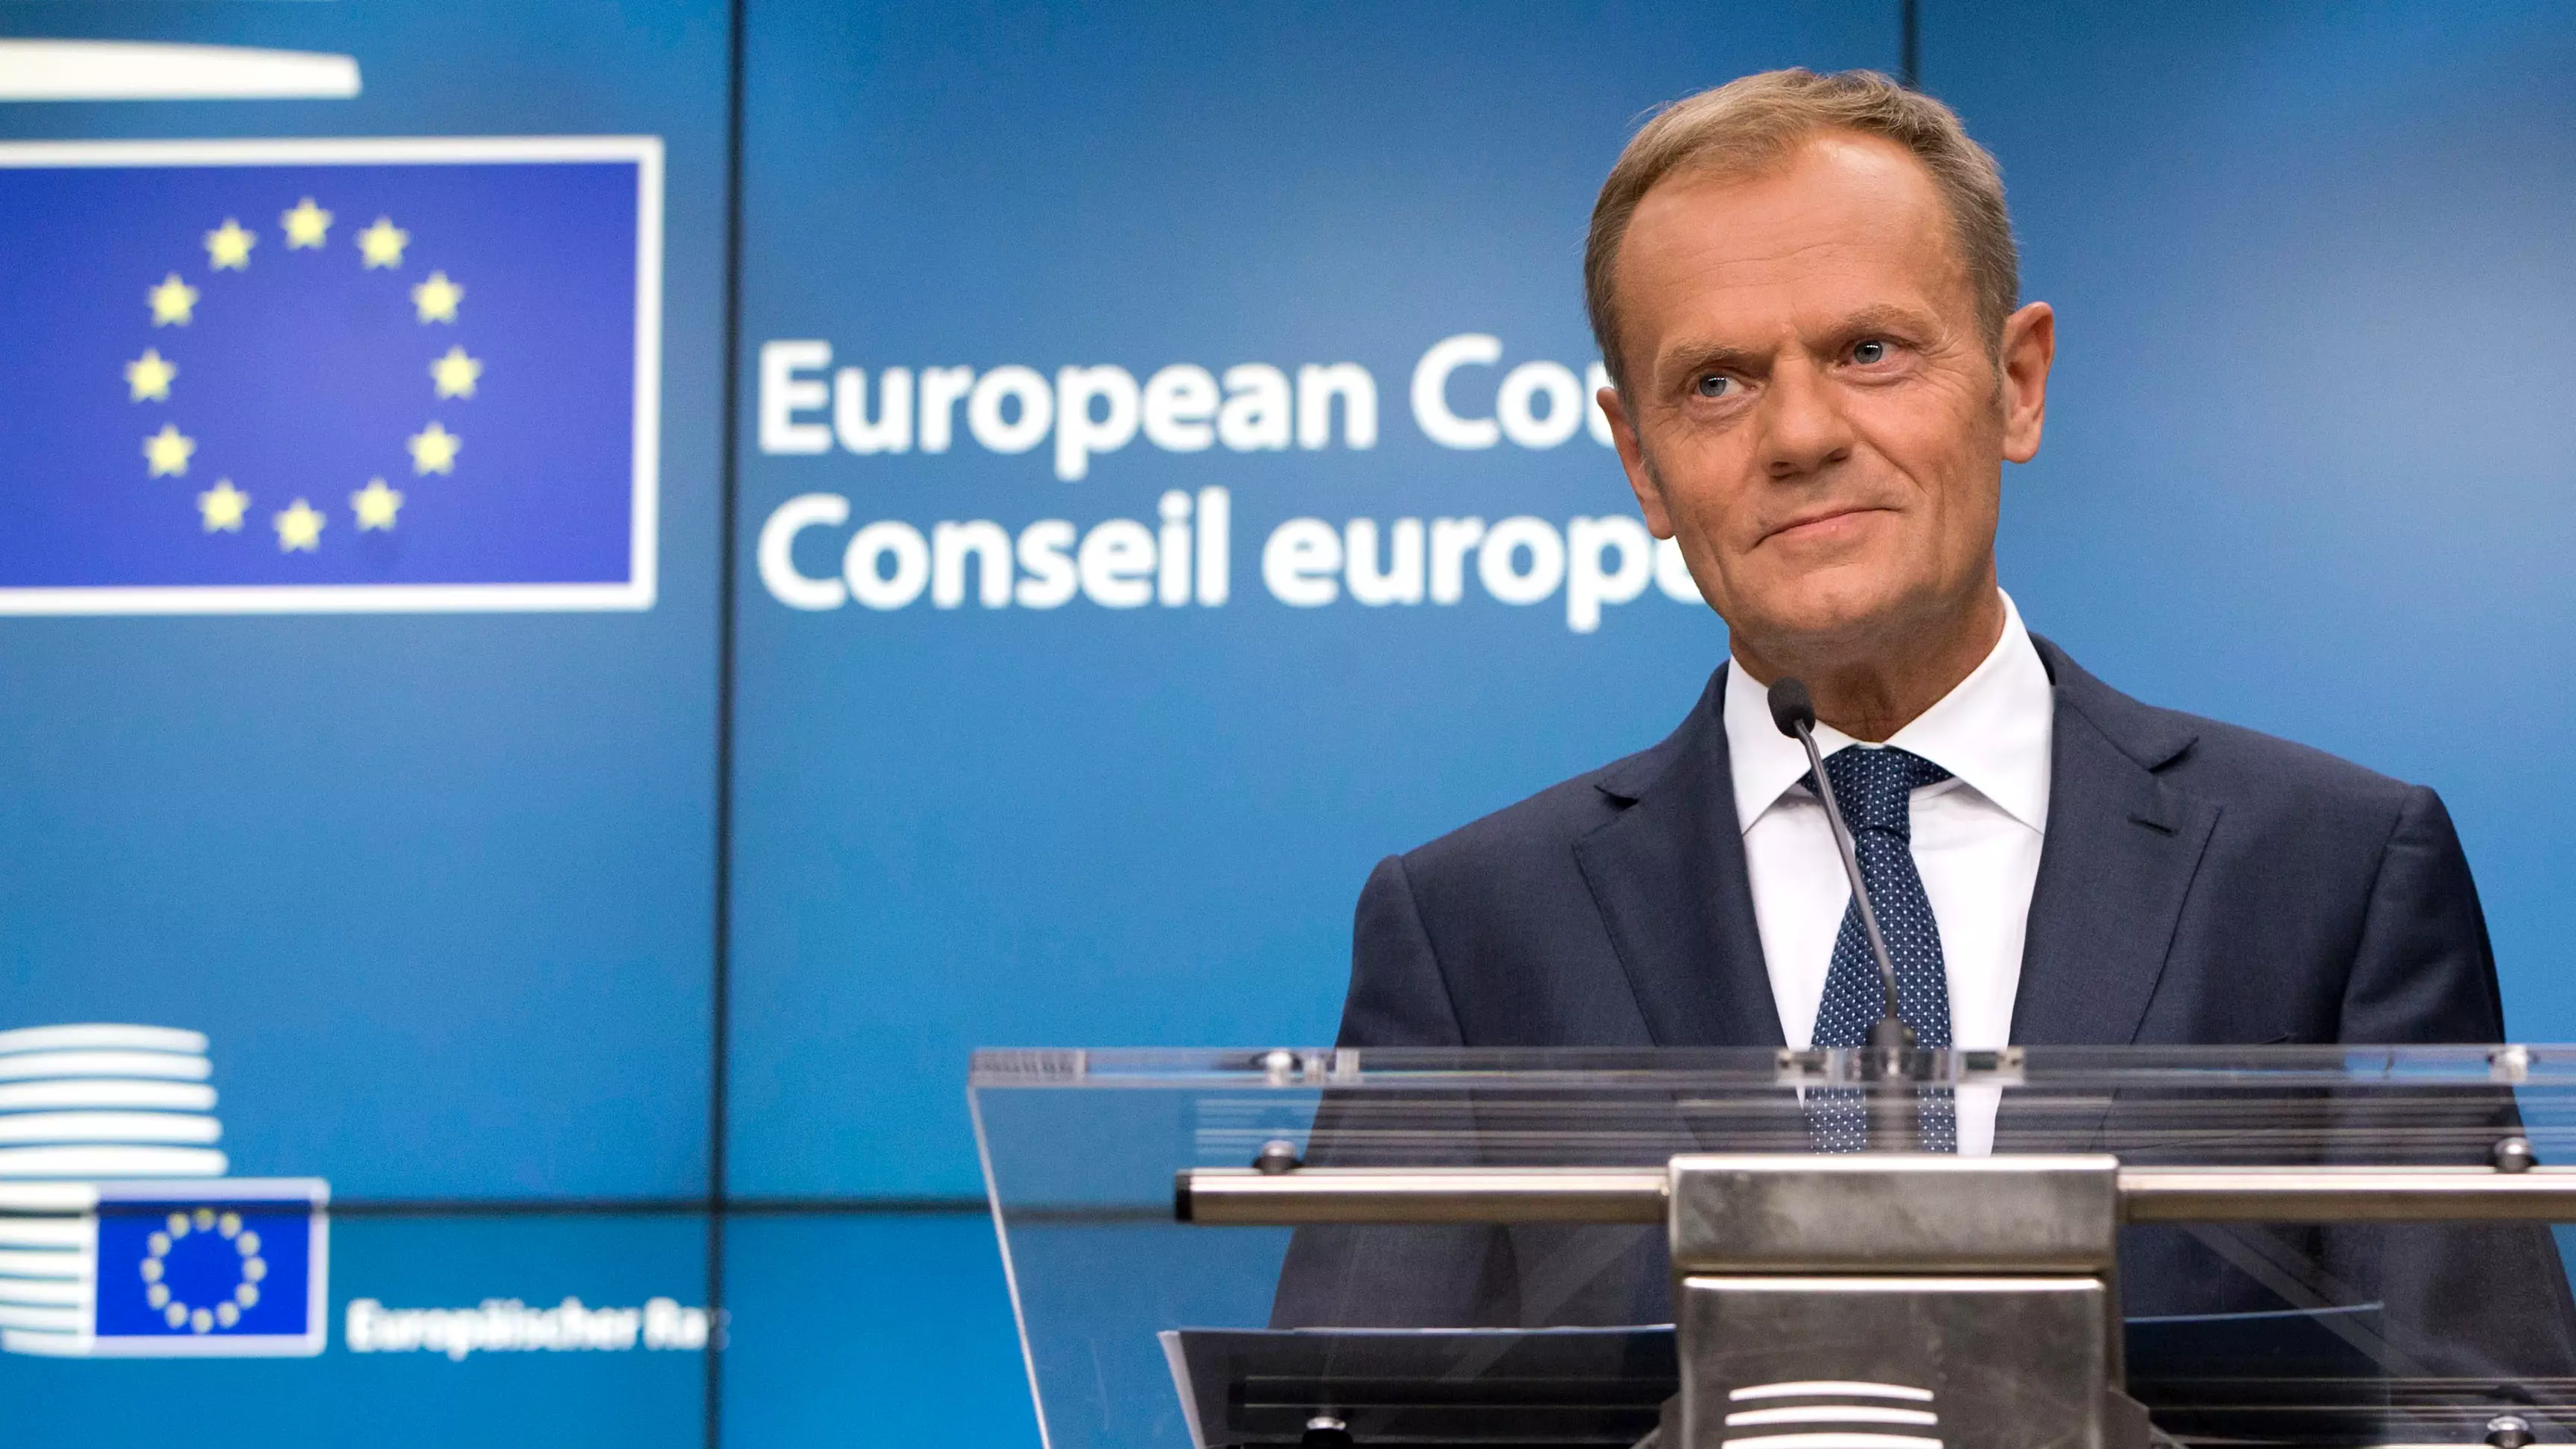 European Council Boss Says Brexit Could Be Reversed